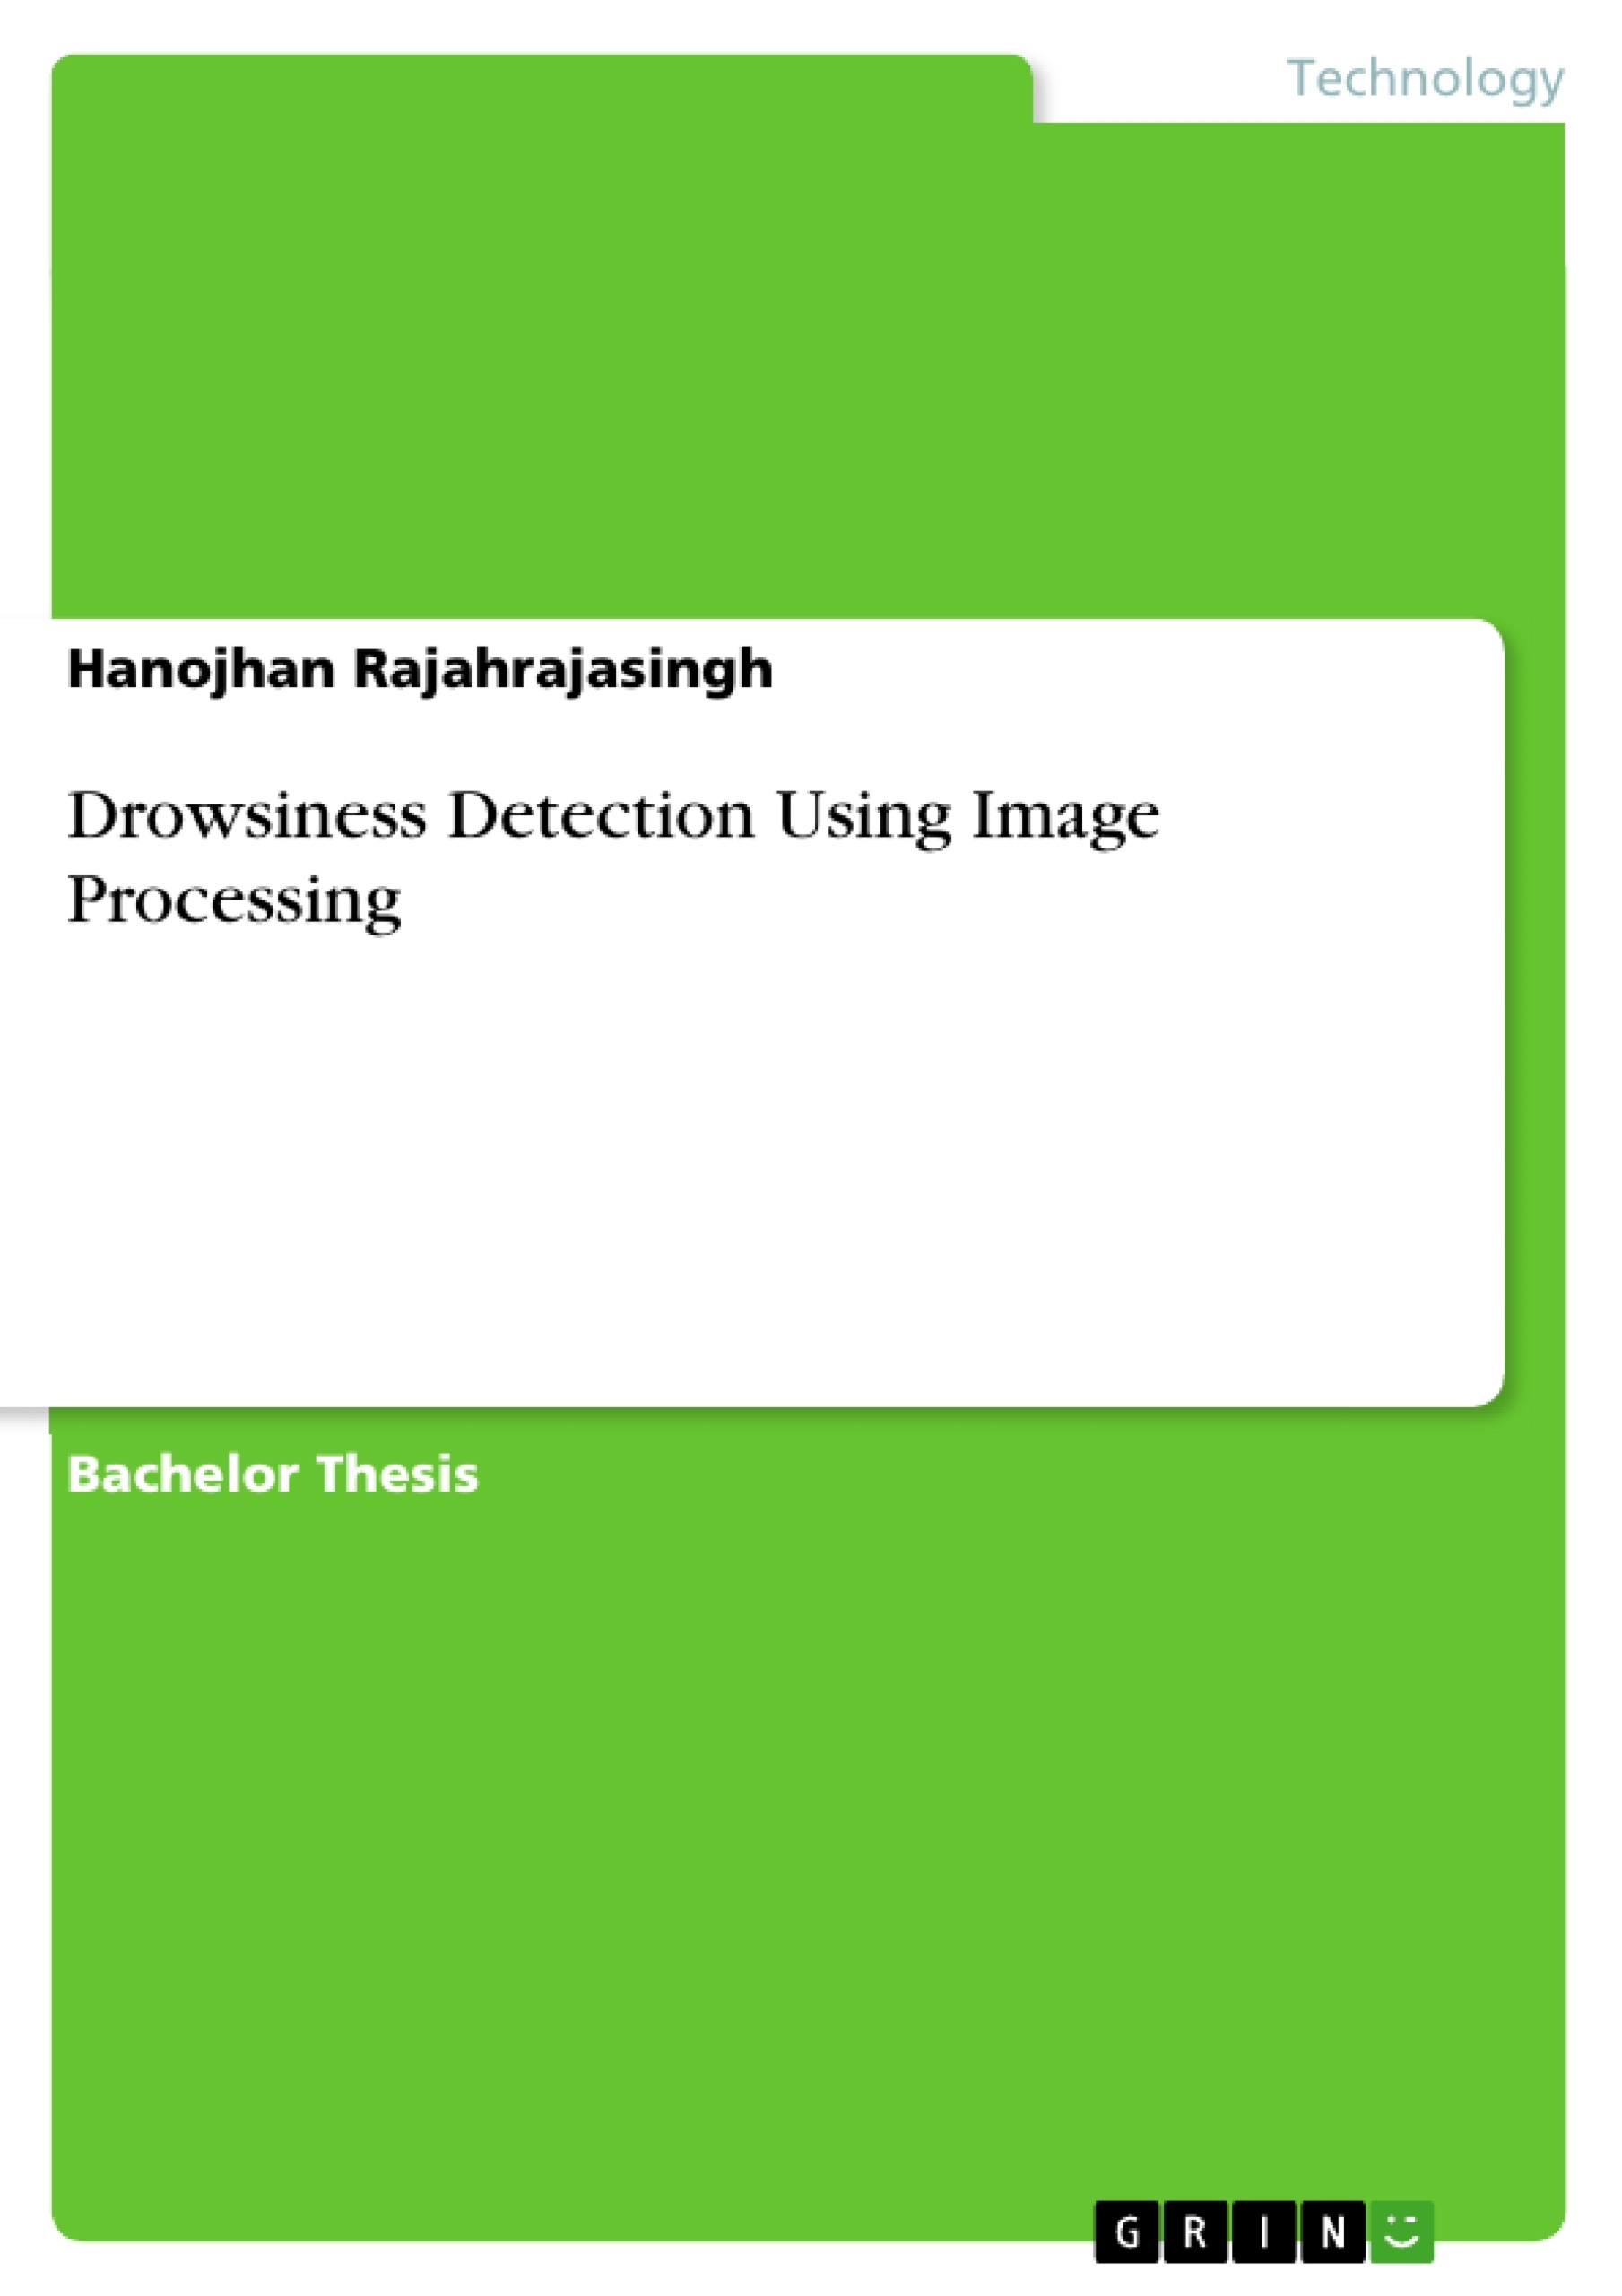 Title: Drowsiness Detection Using Image Processing